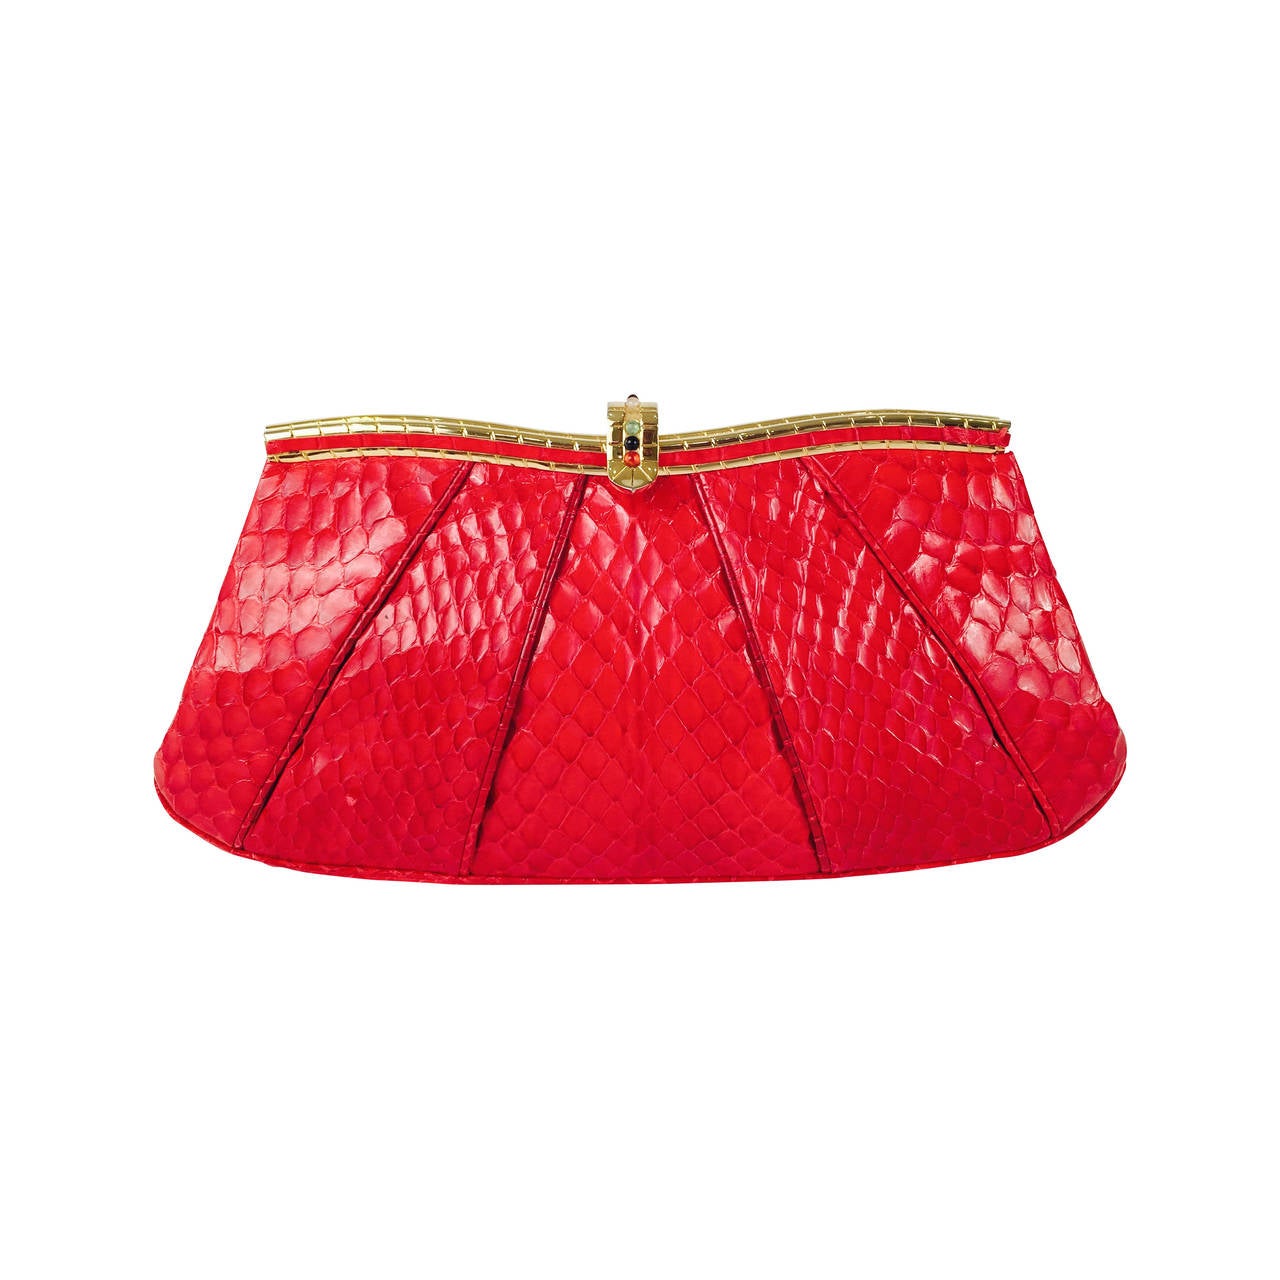 Judith Leiber Red Snakeskin Evening Bag With Jeweled Clasp For Sale